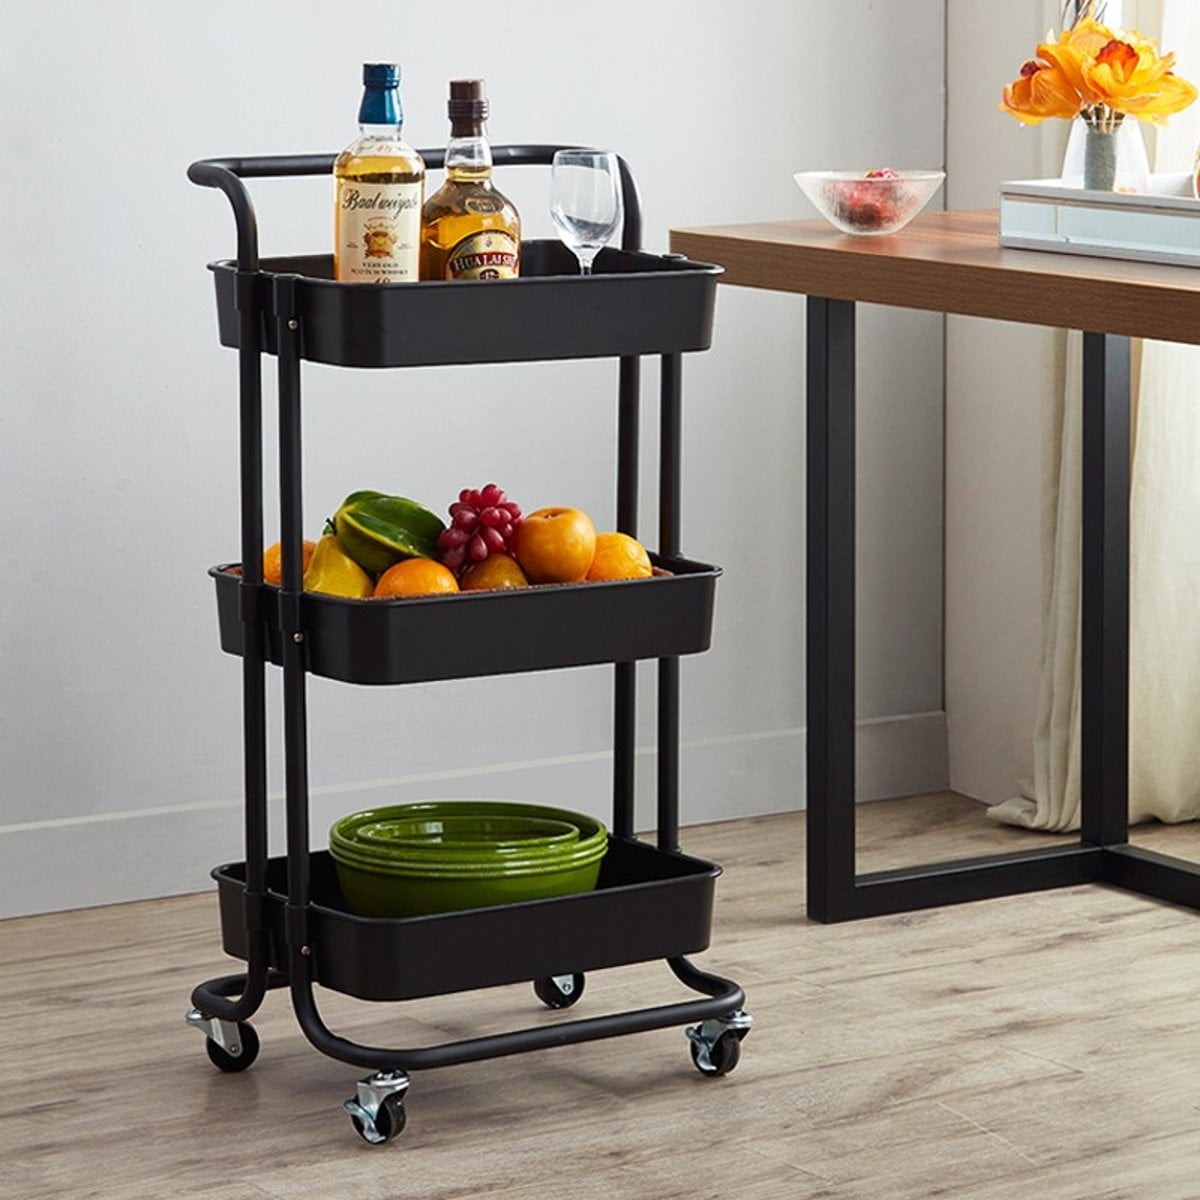 3 Tier Rolling Cart Office Bathroom Serving Cart Easy Assembly for Kitchen Black Metal Ultility Cart with Extra Large Lockable Wheels Makeup Storage Organizer Craft Trolley 